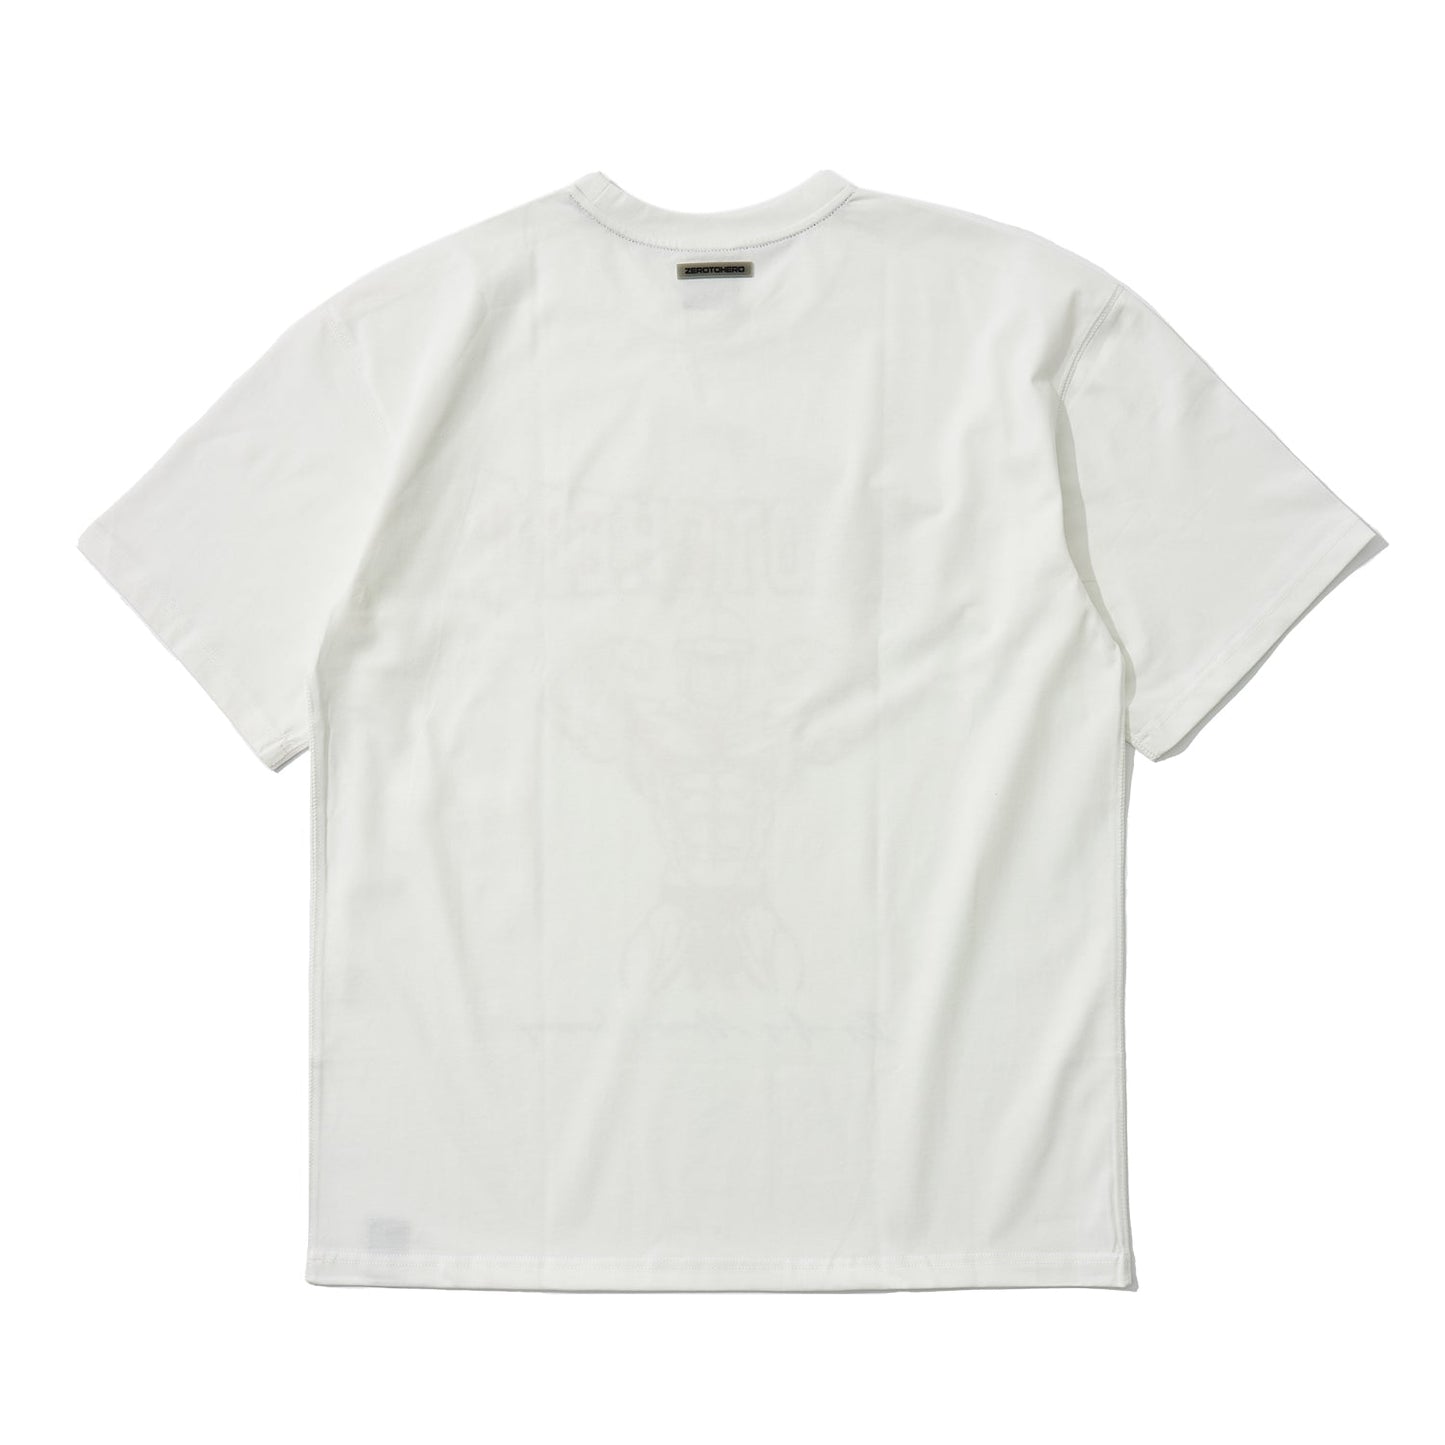 Oversized fit Short-sleeved T-shirt_A type